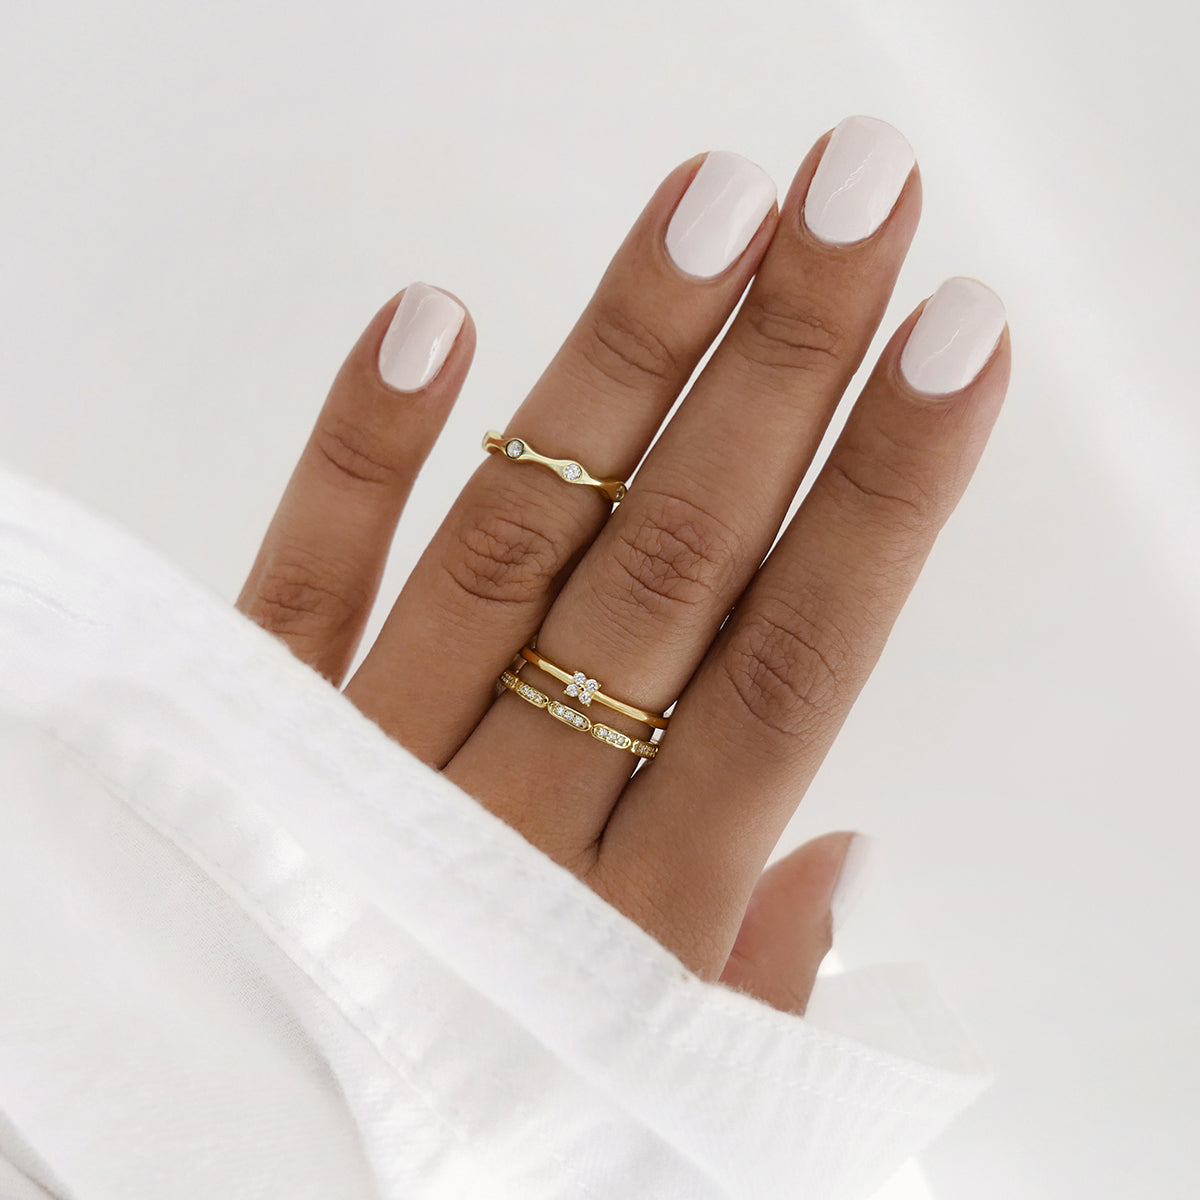 gold rings styled on hand